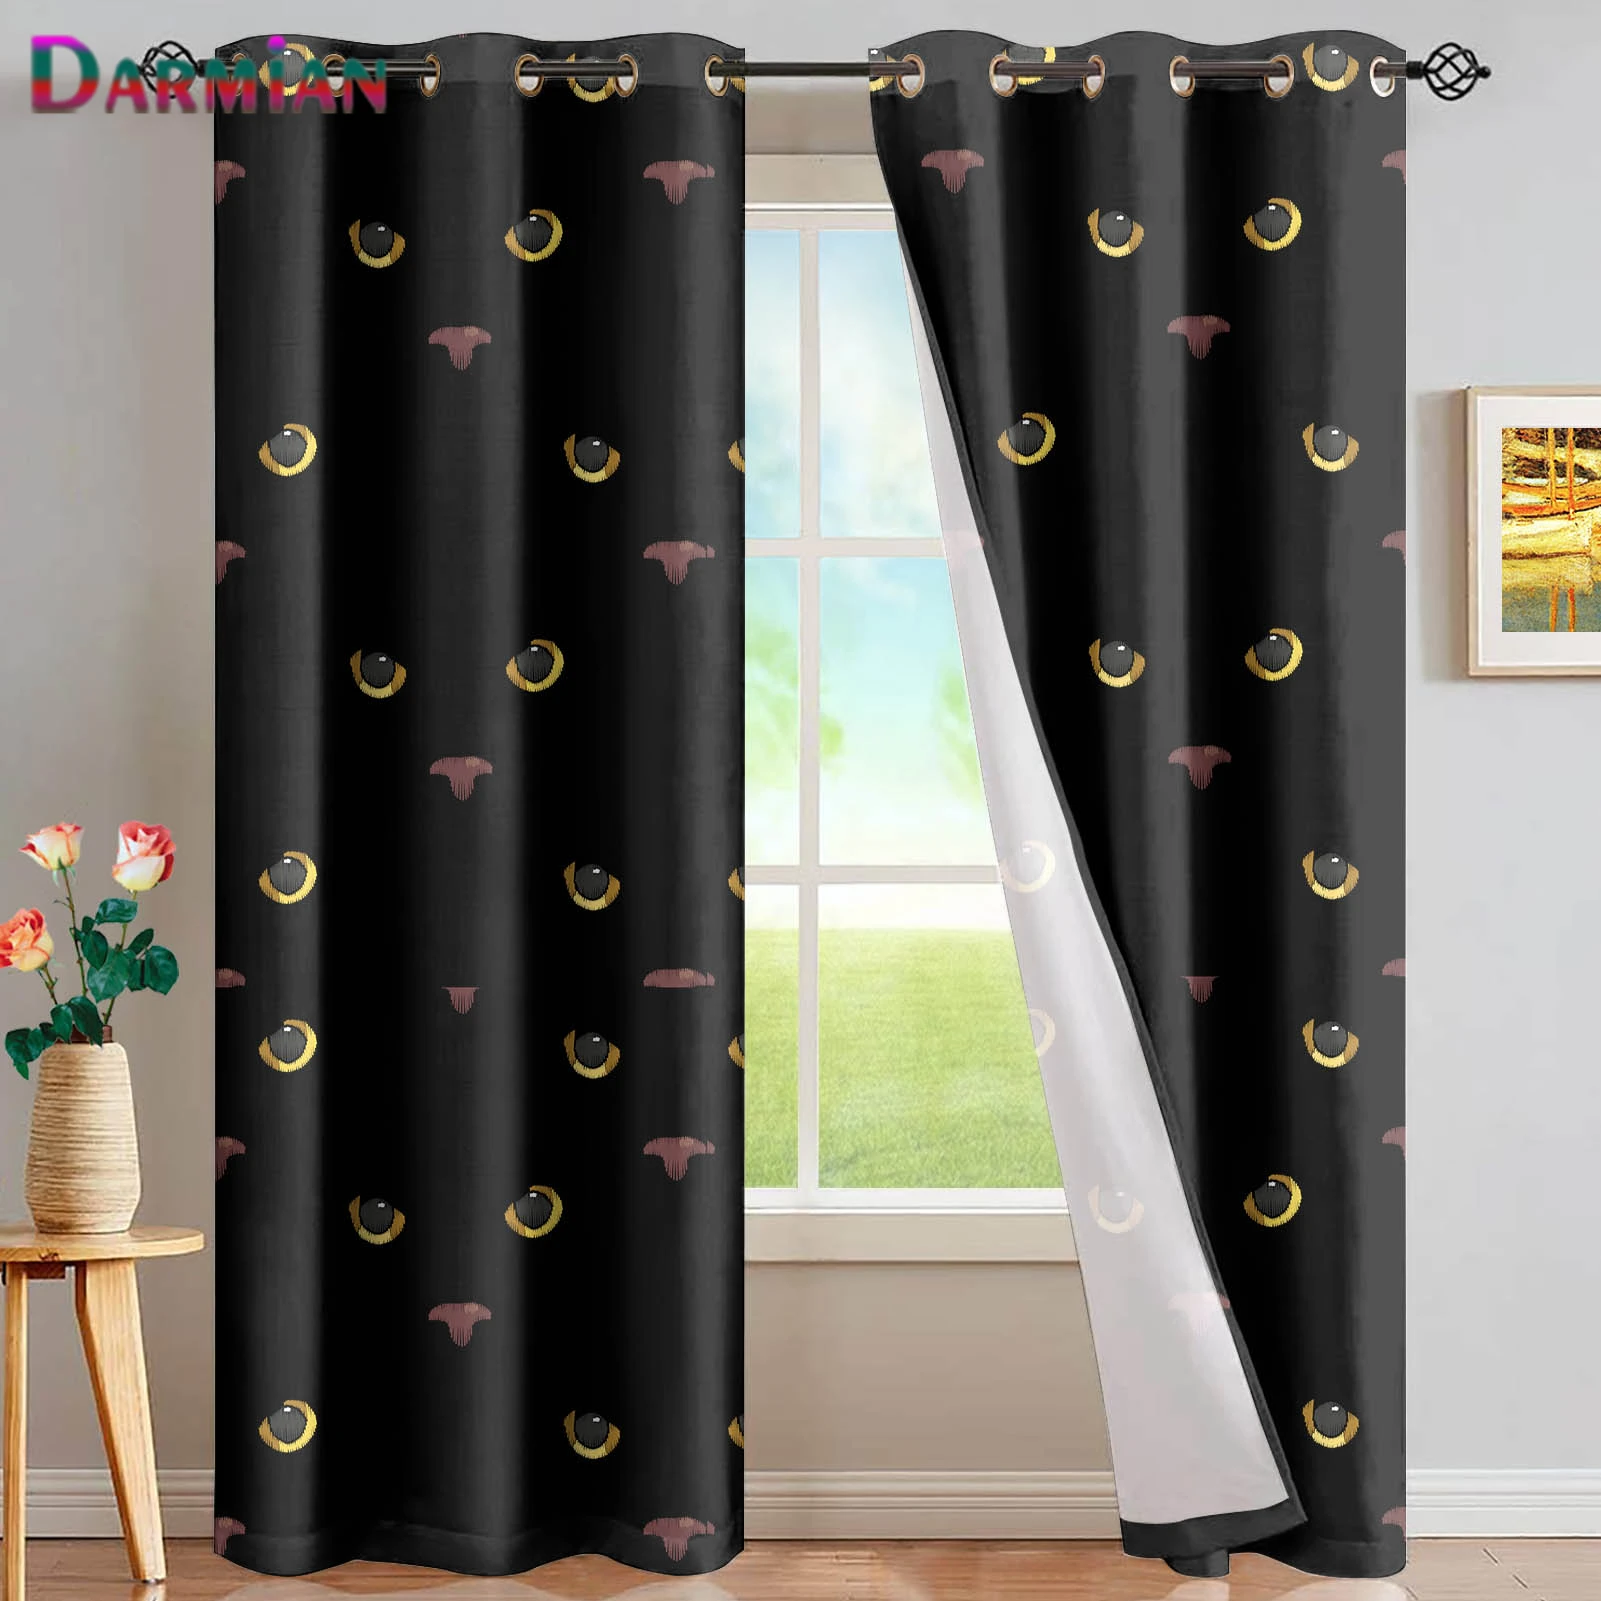 

DARMIAN Cool Black Cat Yellow Eyes Print Pattern Blackout Curtain Set Thermal Insualted Window Draperies for Guest Room Decor